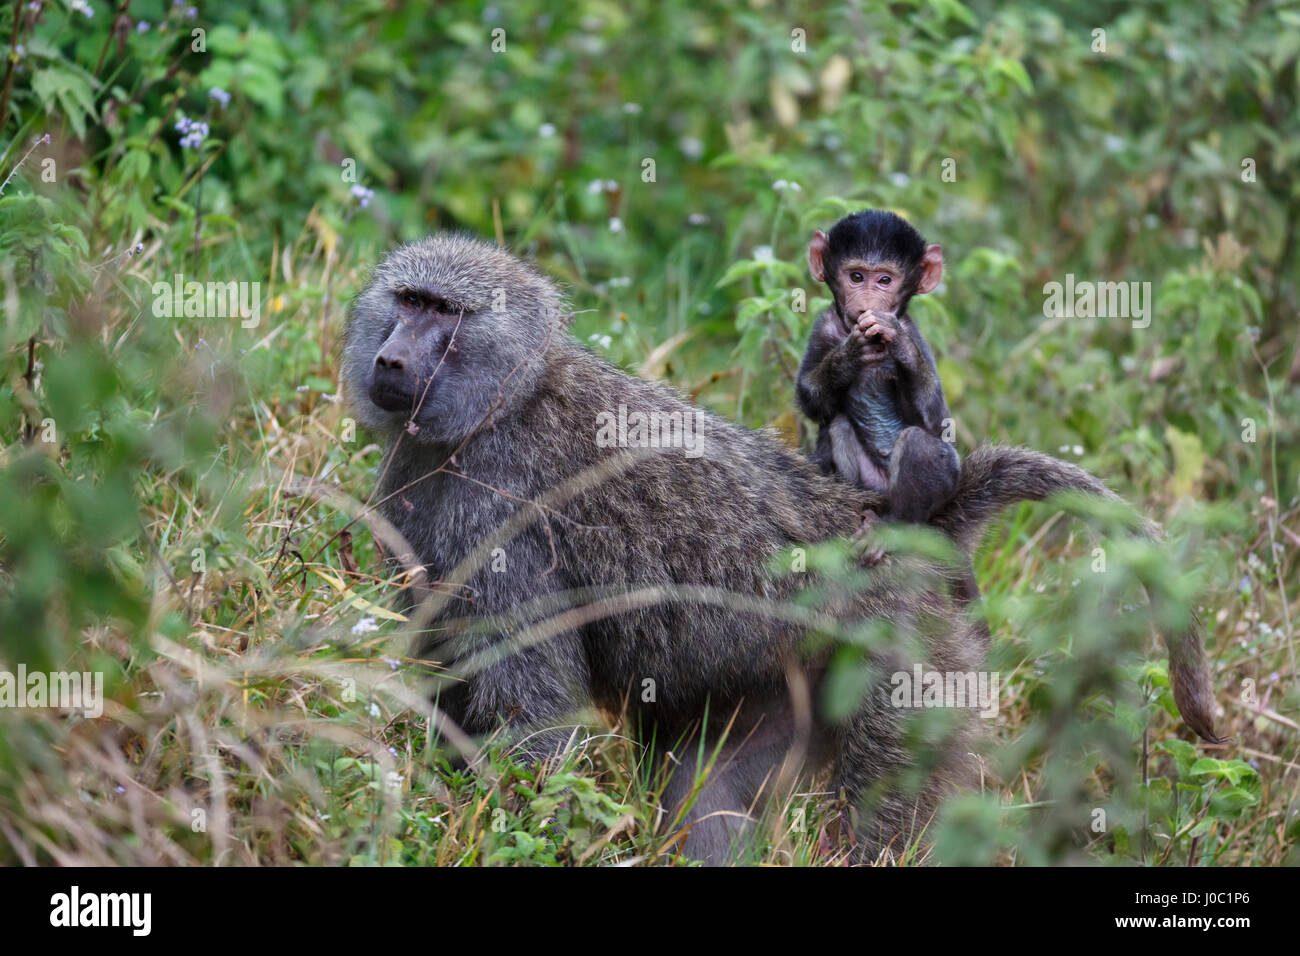 Olive baboon with baby on back (Papio anubis), Arusha National Park, Tanzania Stock Photo